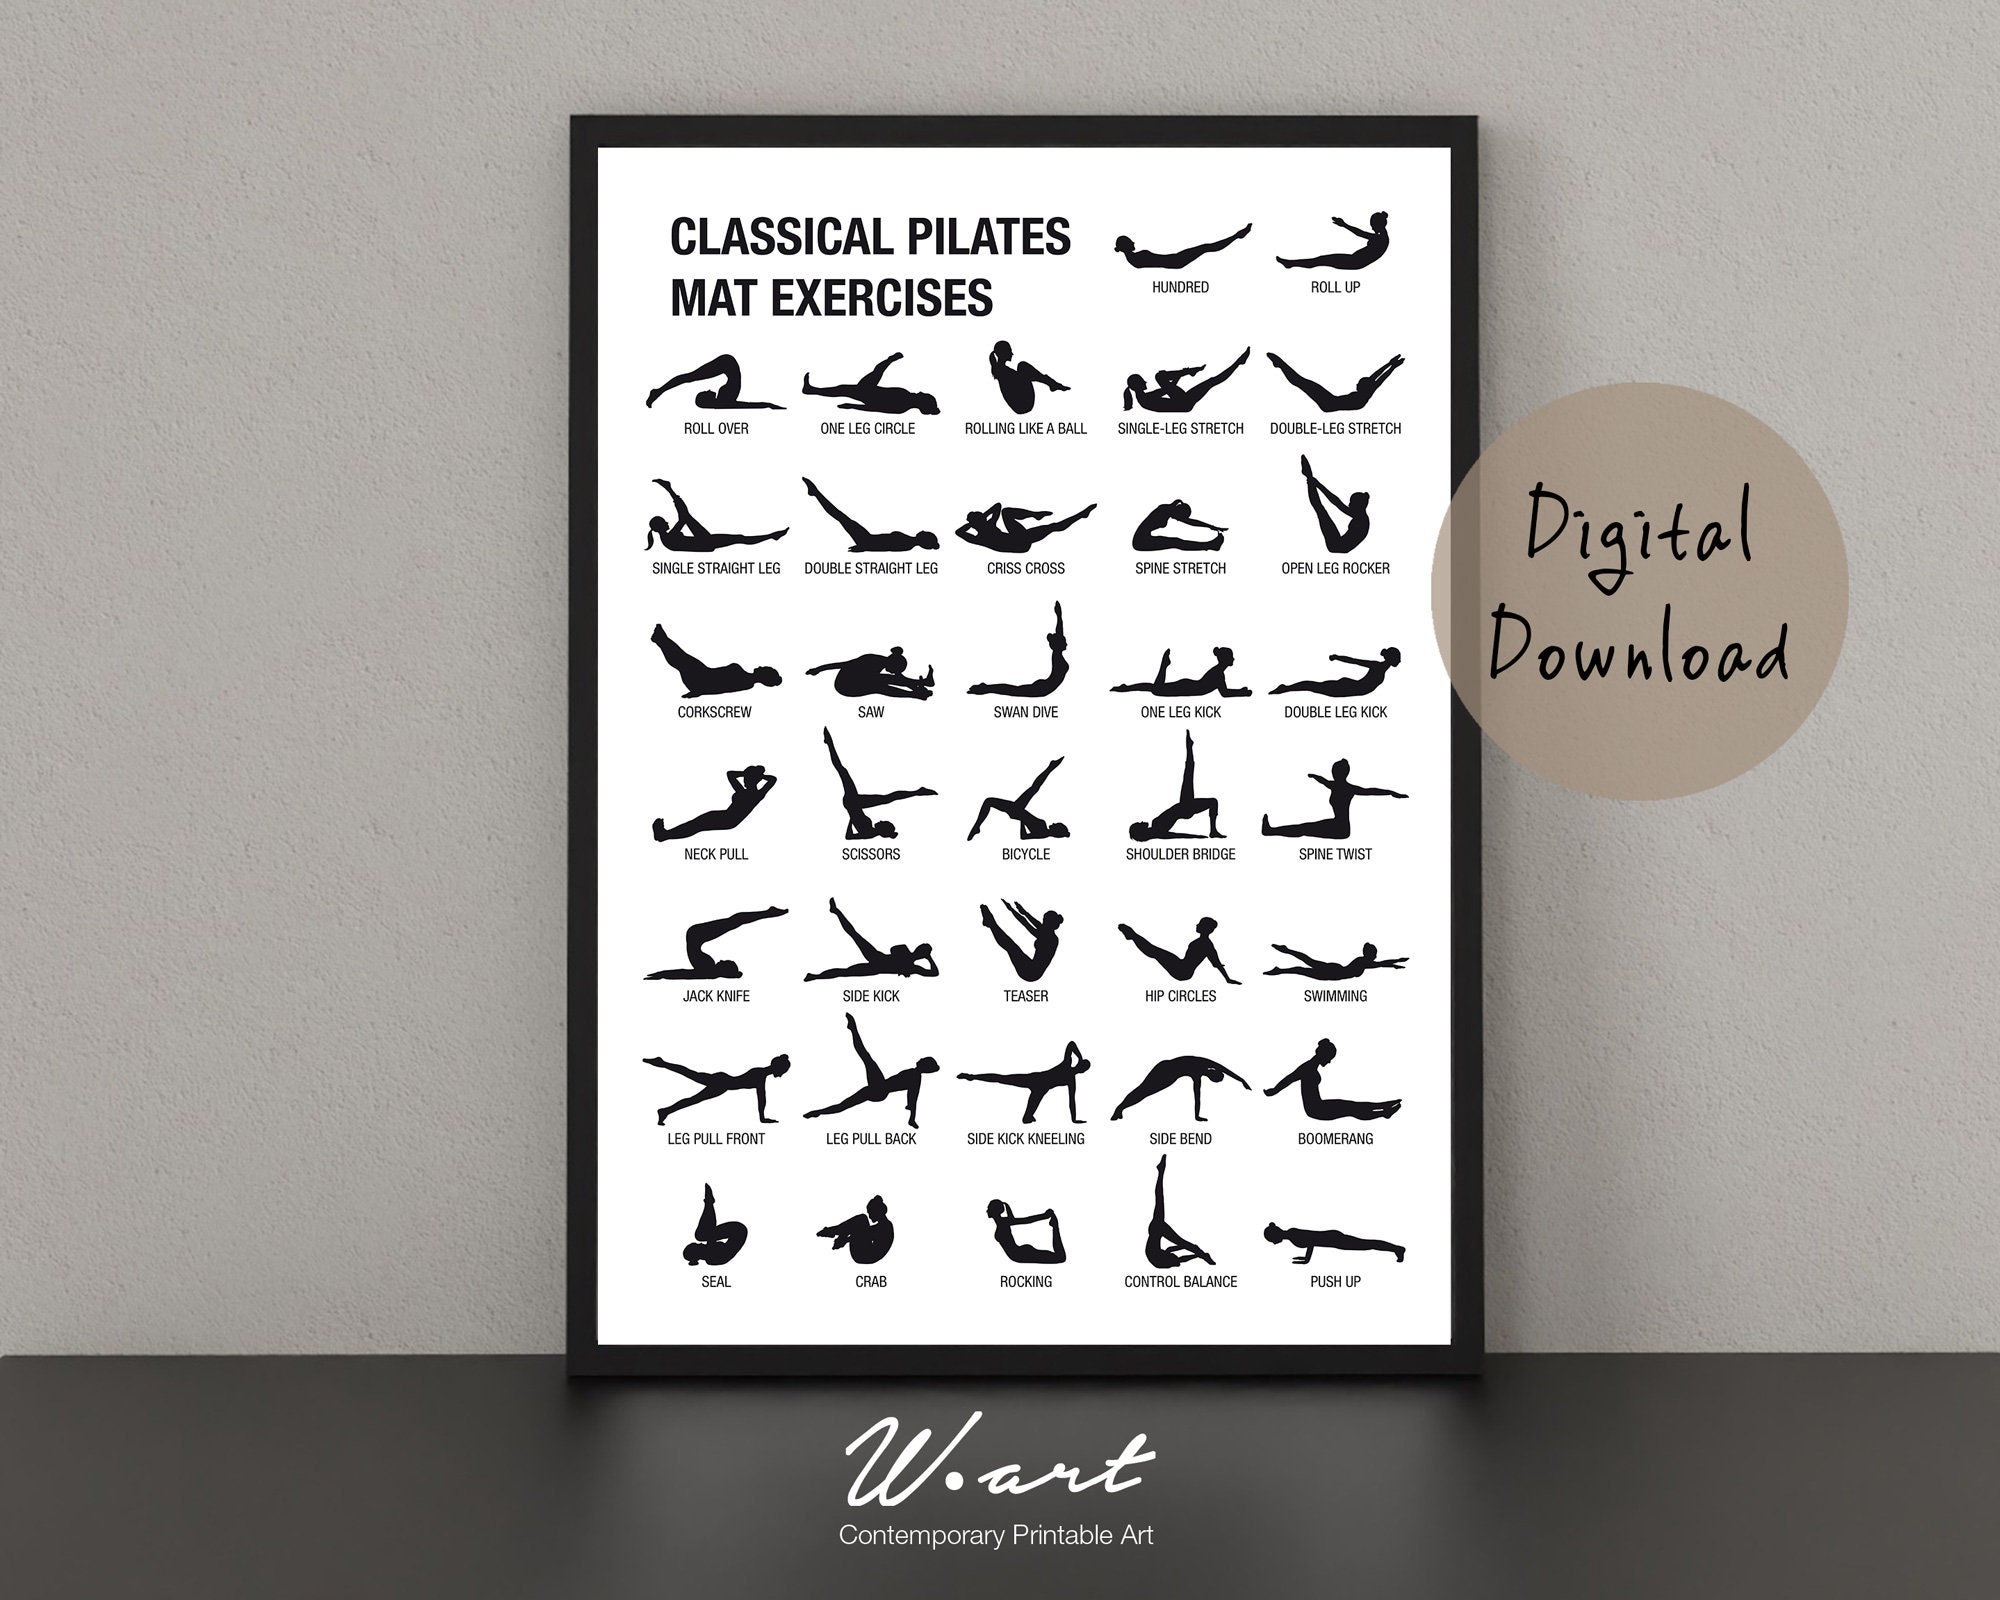 Pilates Poster Vintage-style Pilates Poster depicting the original